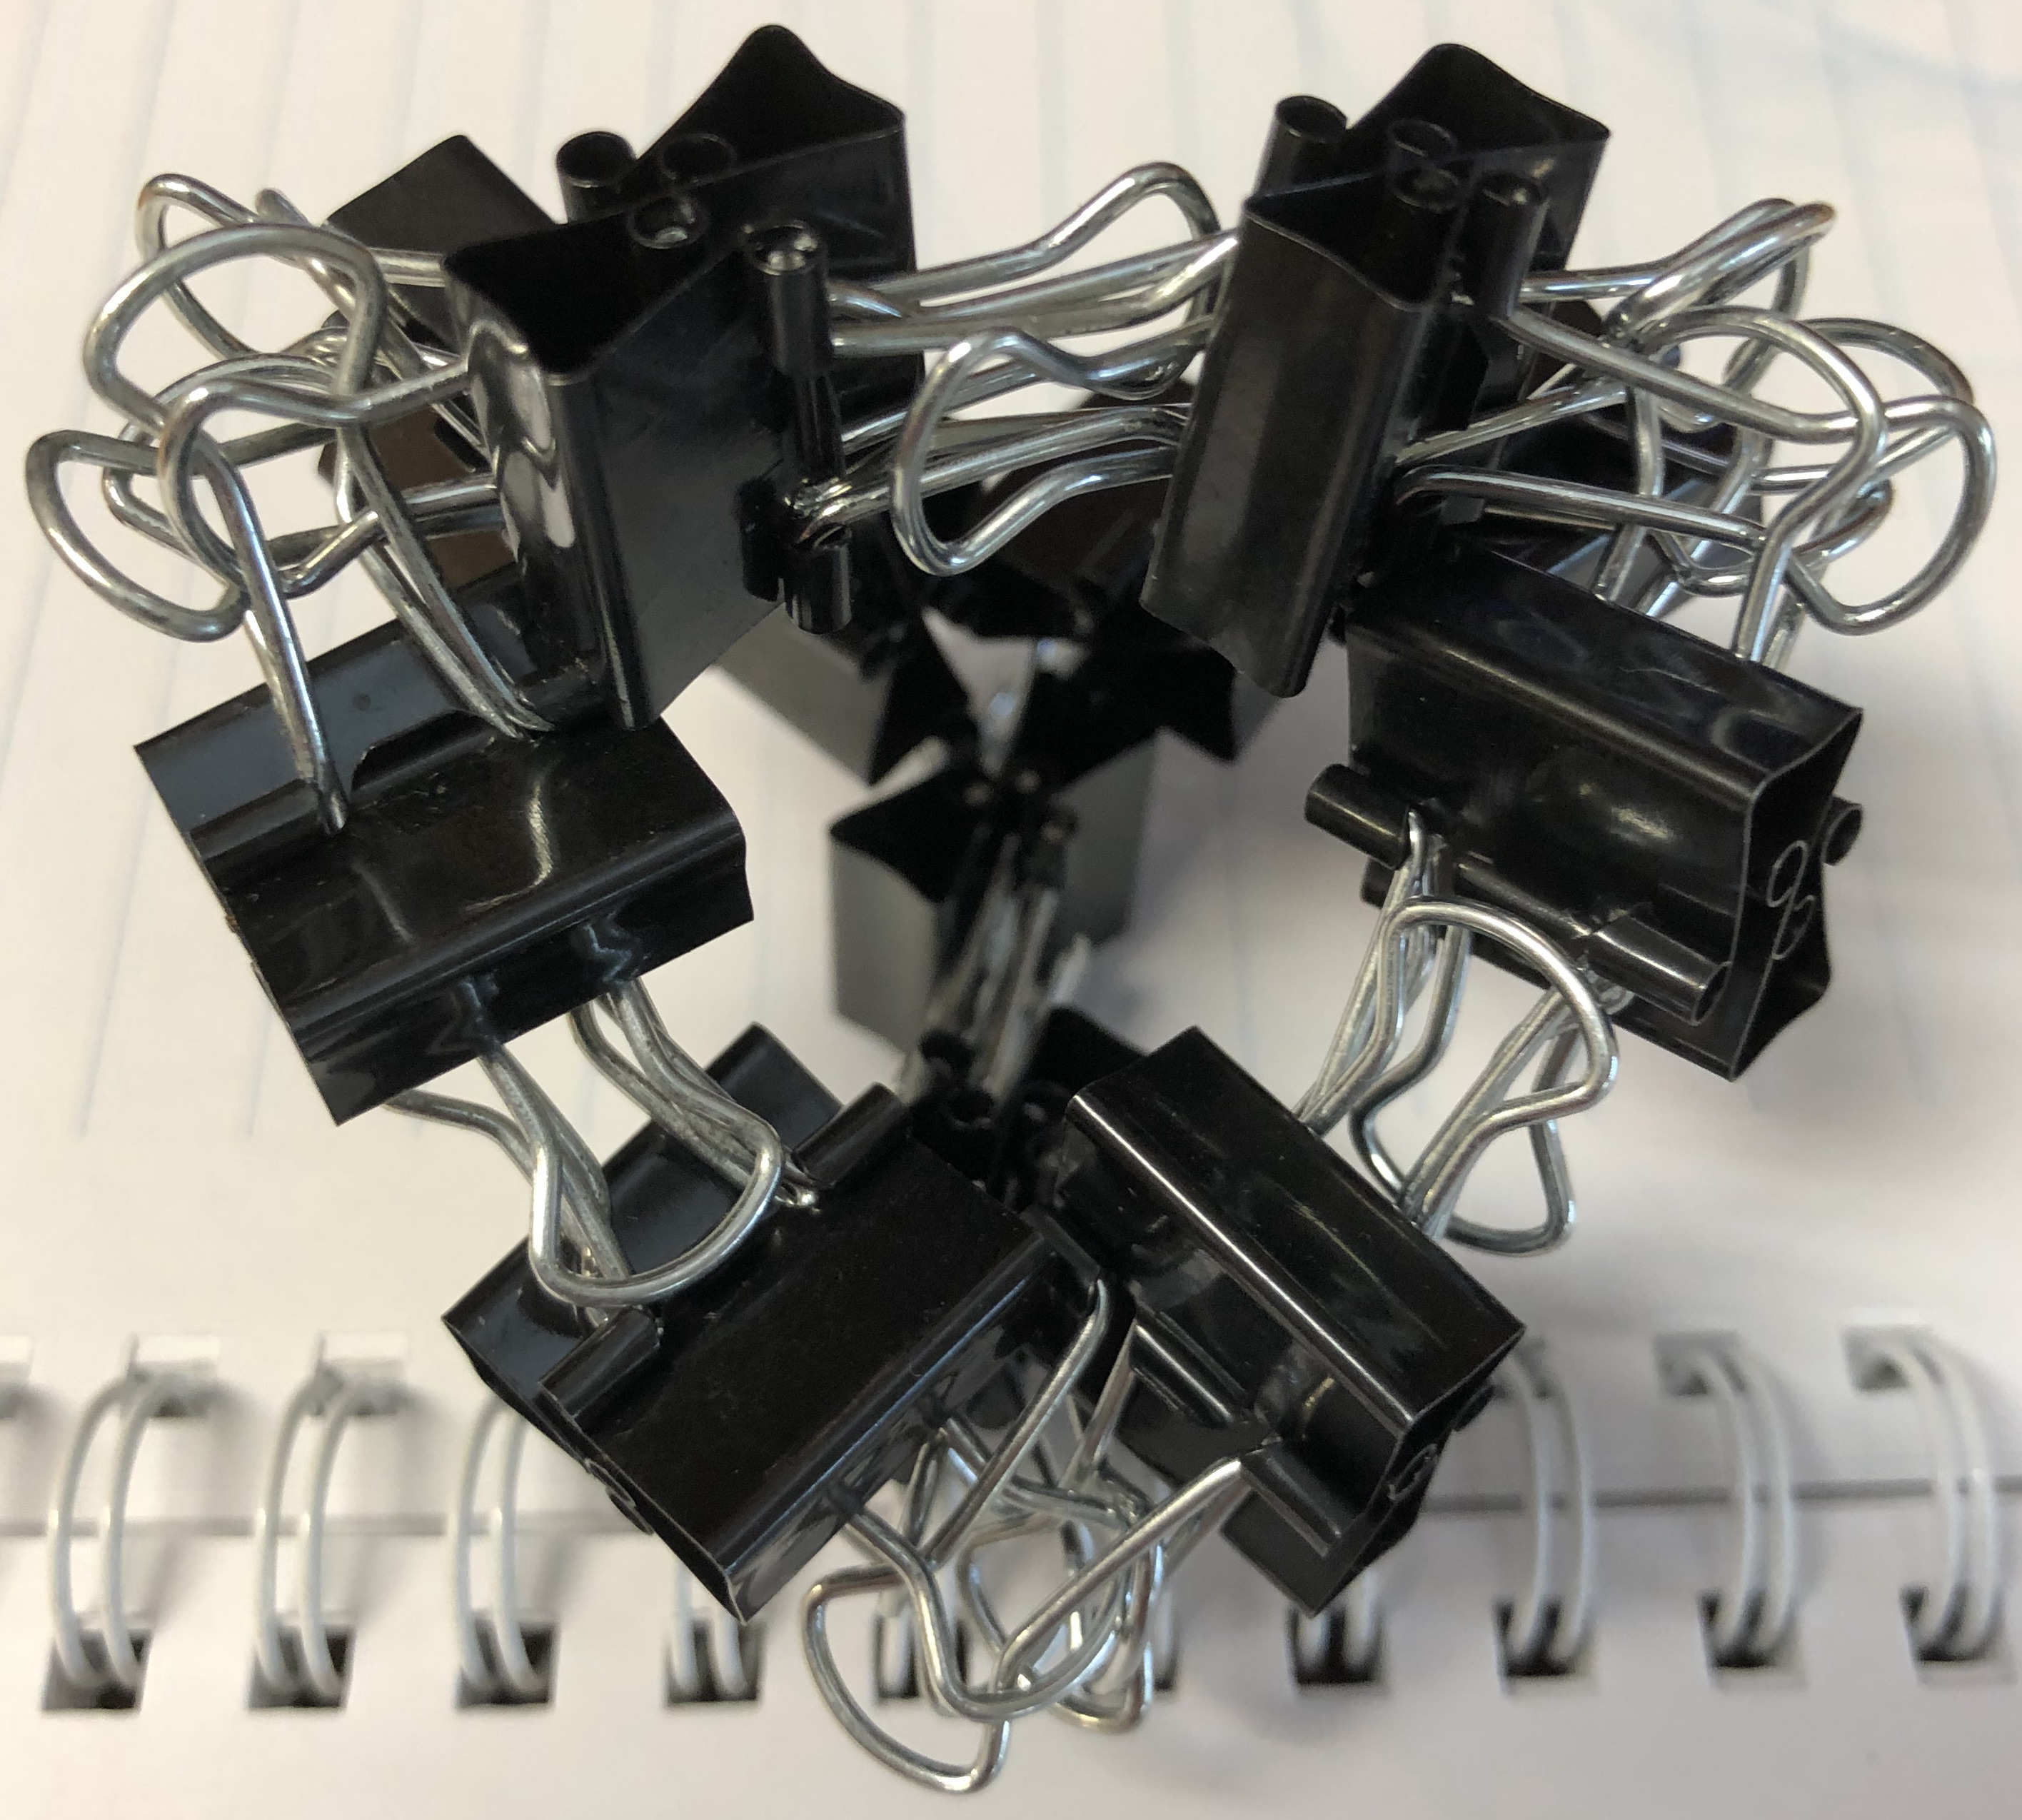 24 clips forming 6 II-edges forming tetrahedron